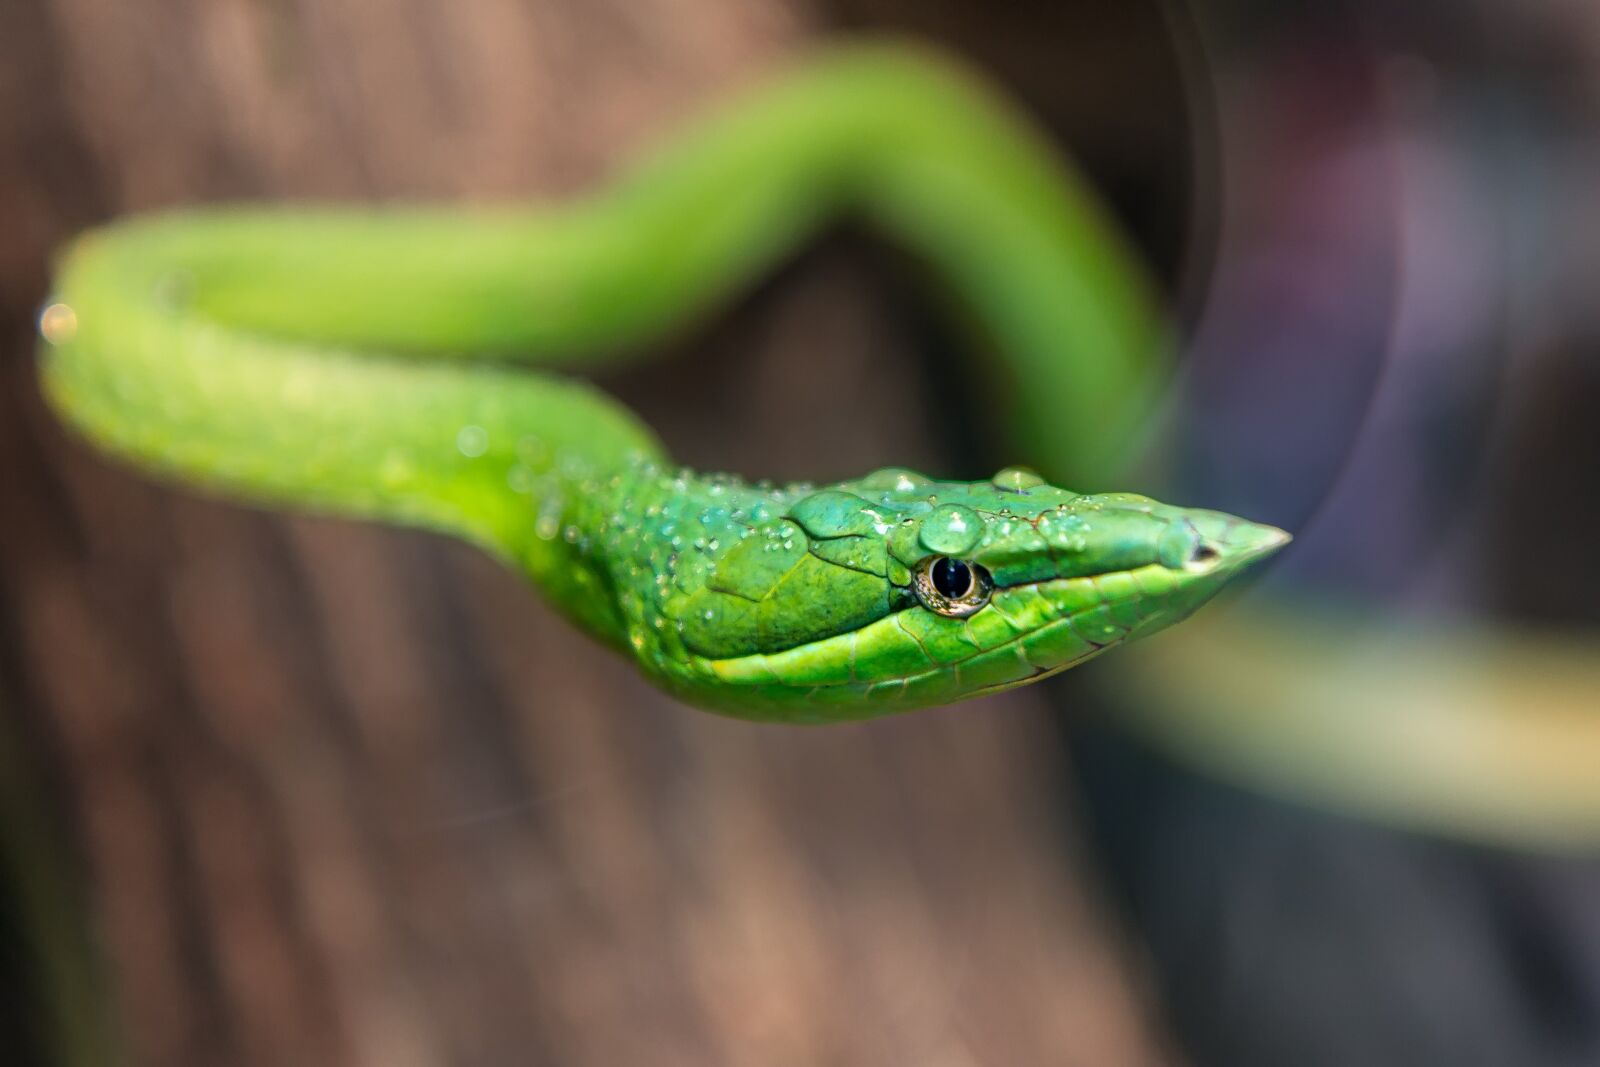 Canon EOS 60D + Sigma 12-24mm f/4.5-5.6 EX DG ASPHERICAL HSM + 1.4x sample photo. Zoo, green snake, reptile photography